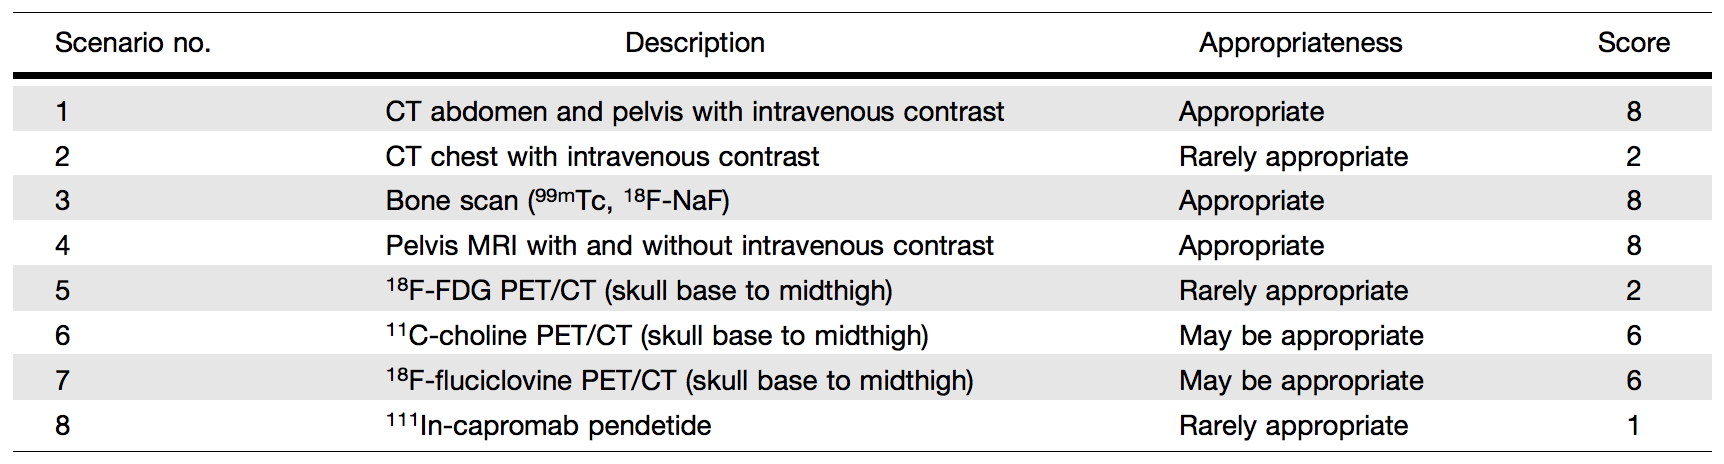 Clinical Scenarios for BCR After Prior Definitive Treatment with RP or RT